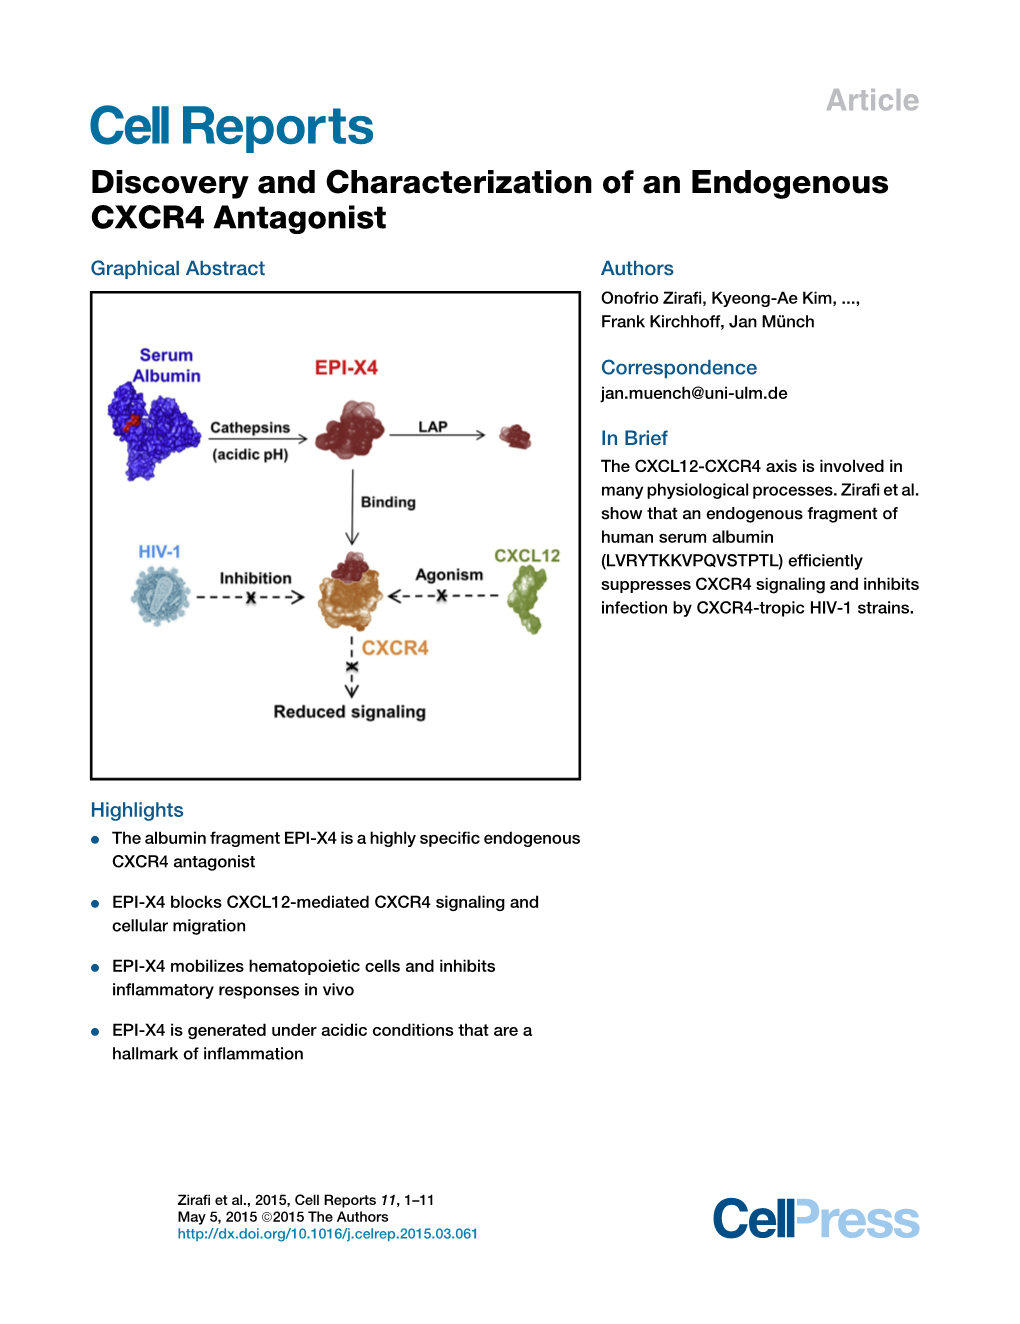 Discovery and Characterization of an Endogenous CXCR4 Antagonist